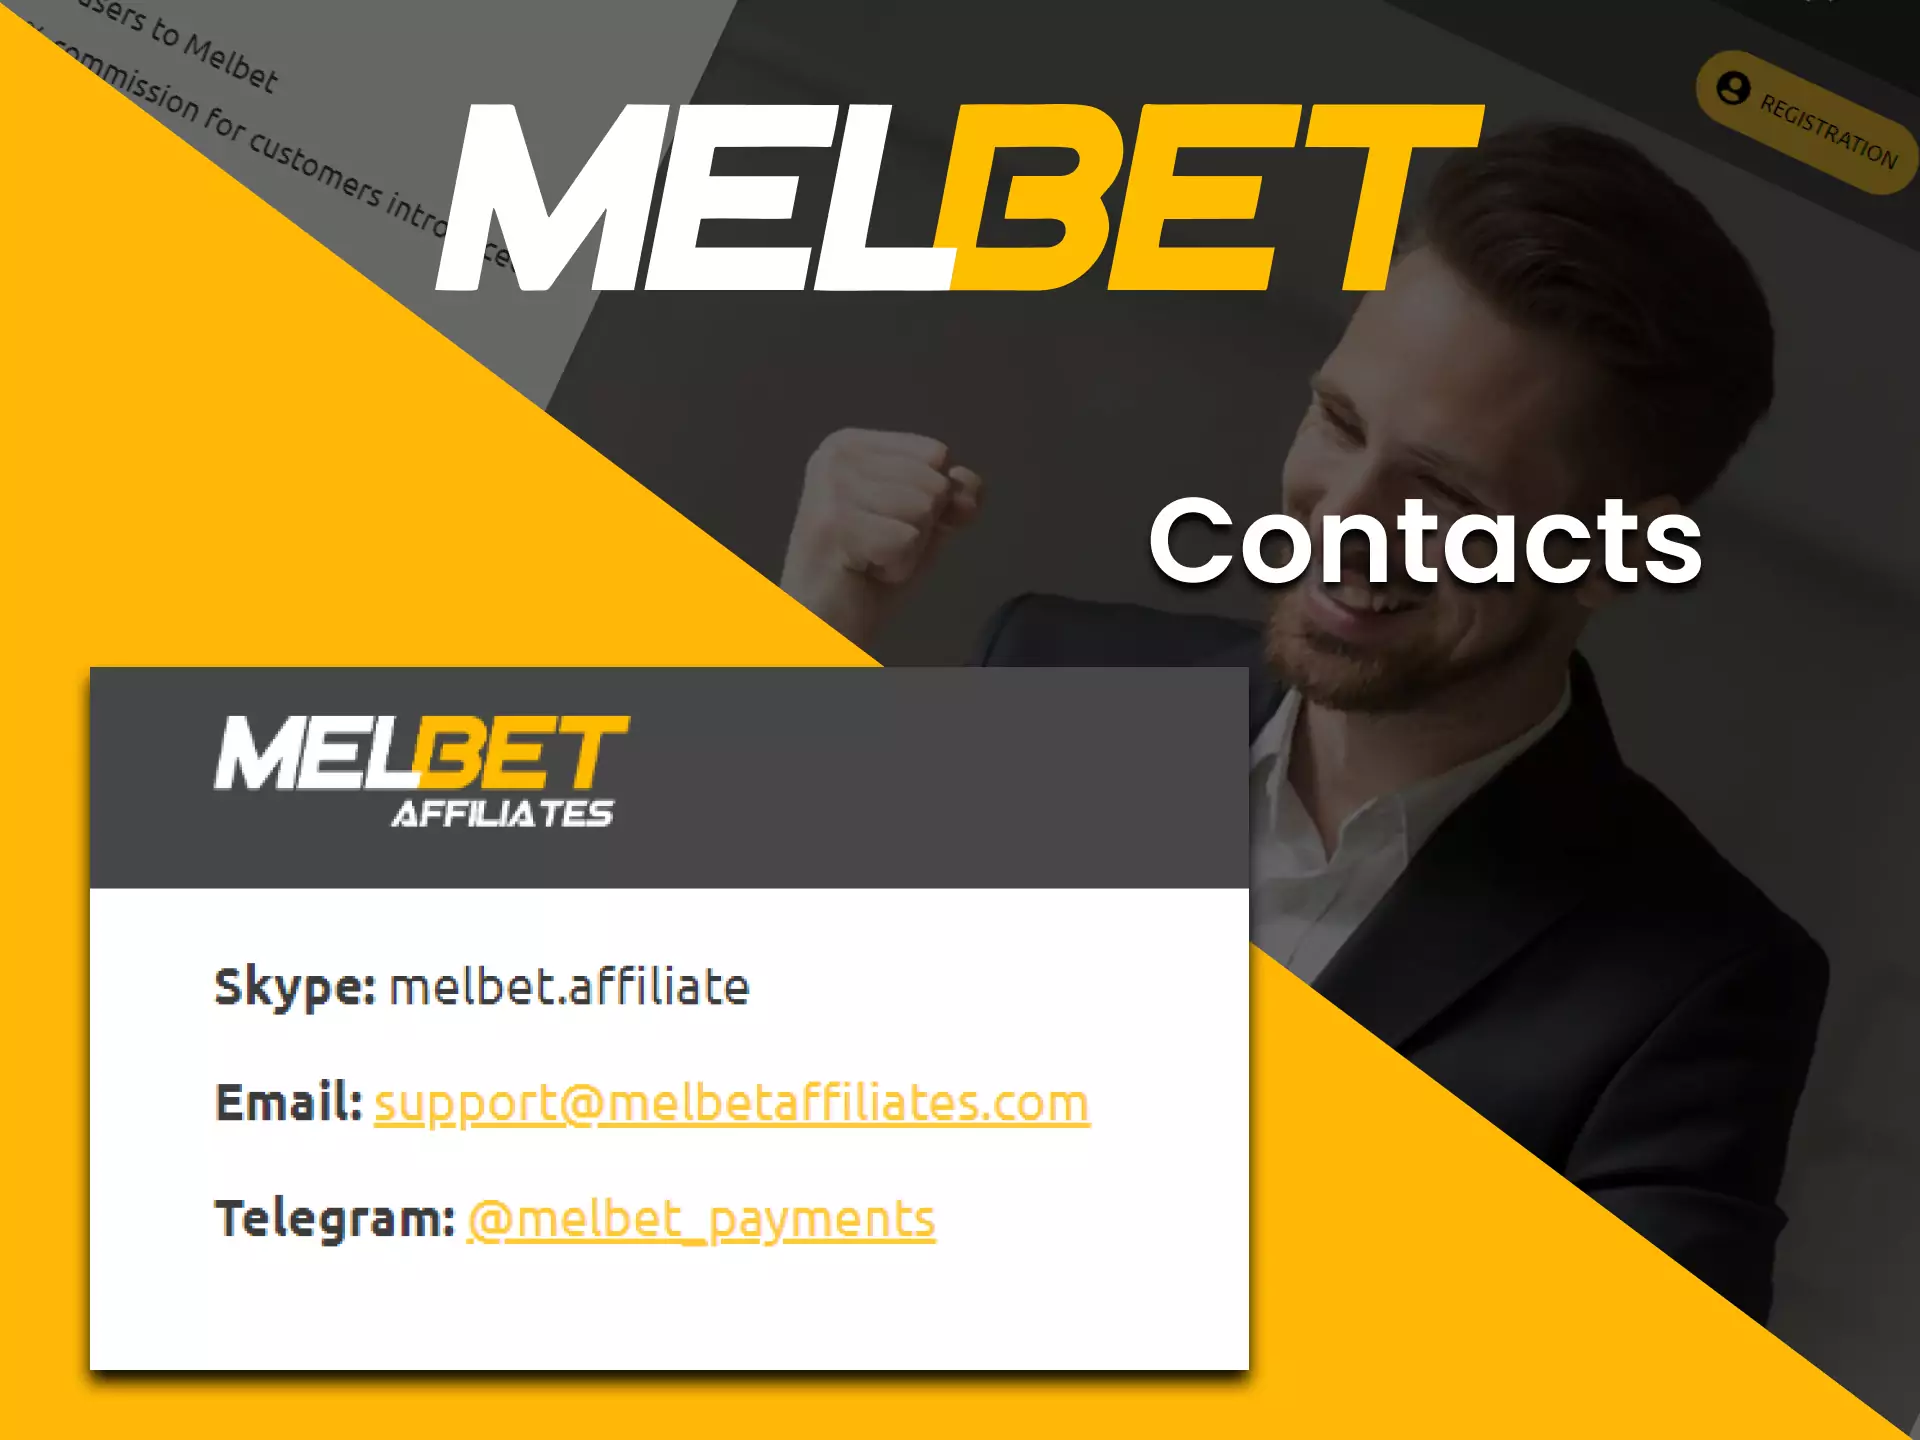 Contact Melbet support if you have questions about the affiliate club.